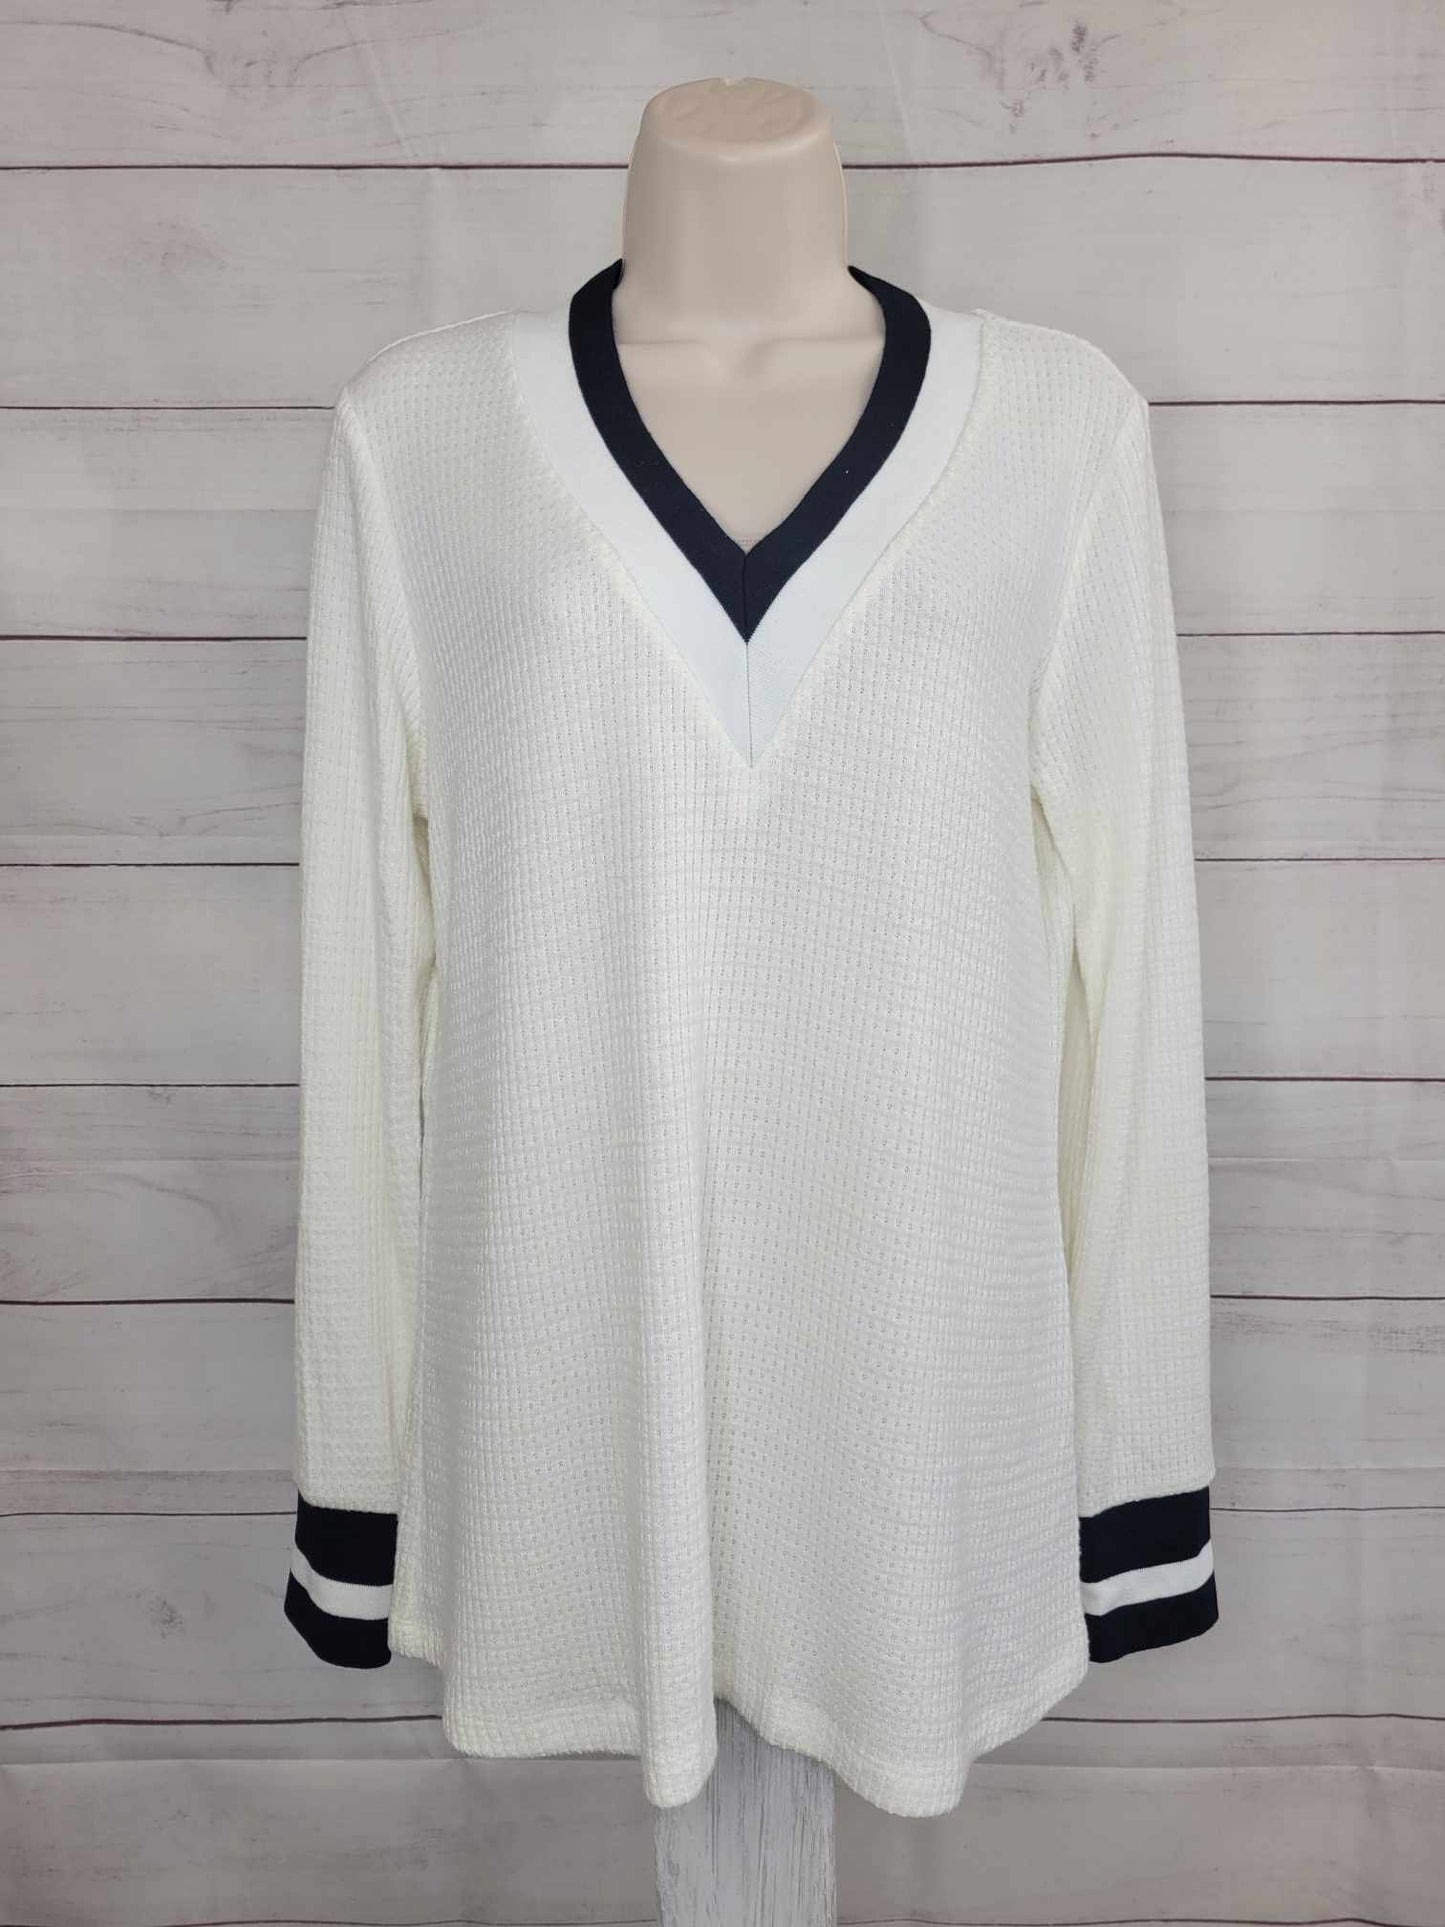 SMALL IVORY A467189 Susan Graver Weekend Brushed Waffle Knit Top w/Striped Rib Trim